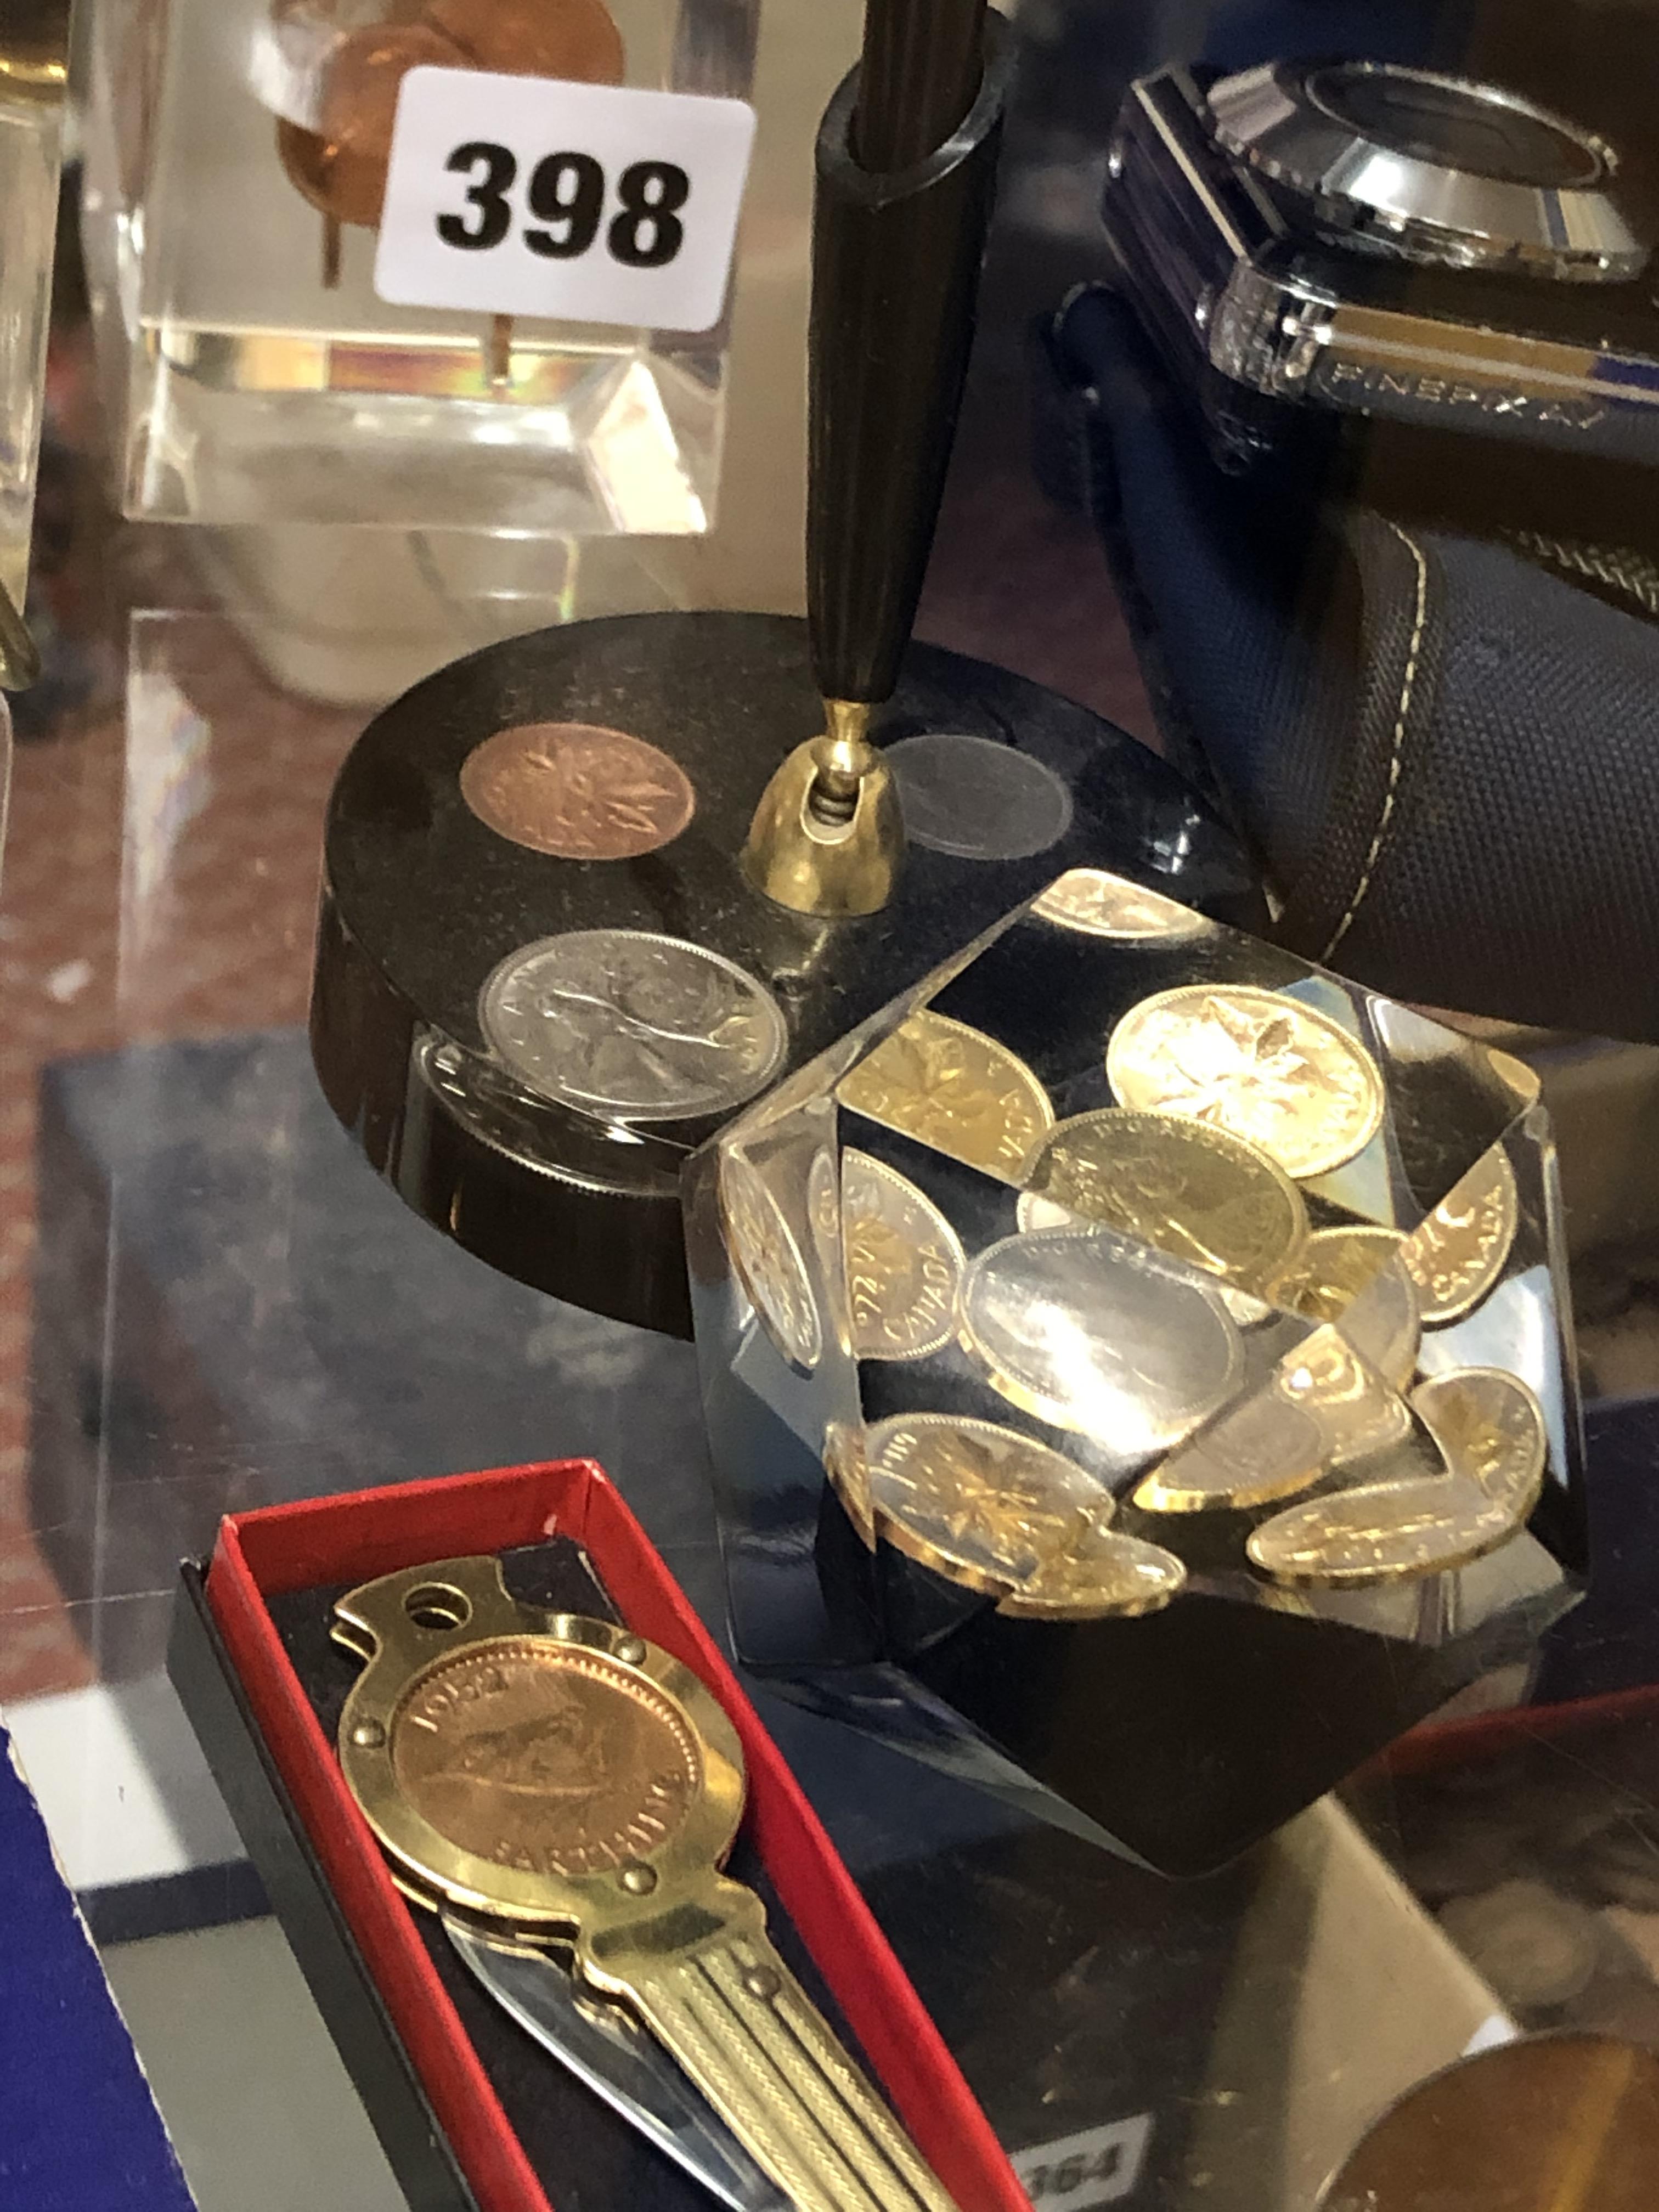 SELECTION OF NOVELTY COIN INSET PERSPEX PEG AND MONUMENT PAPERWEIGHTS AND A DESK STAND - Image 3 of 6